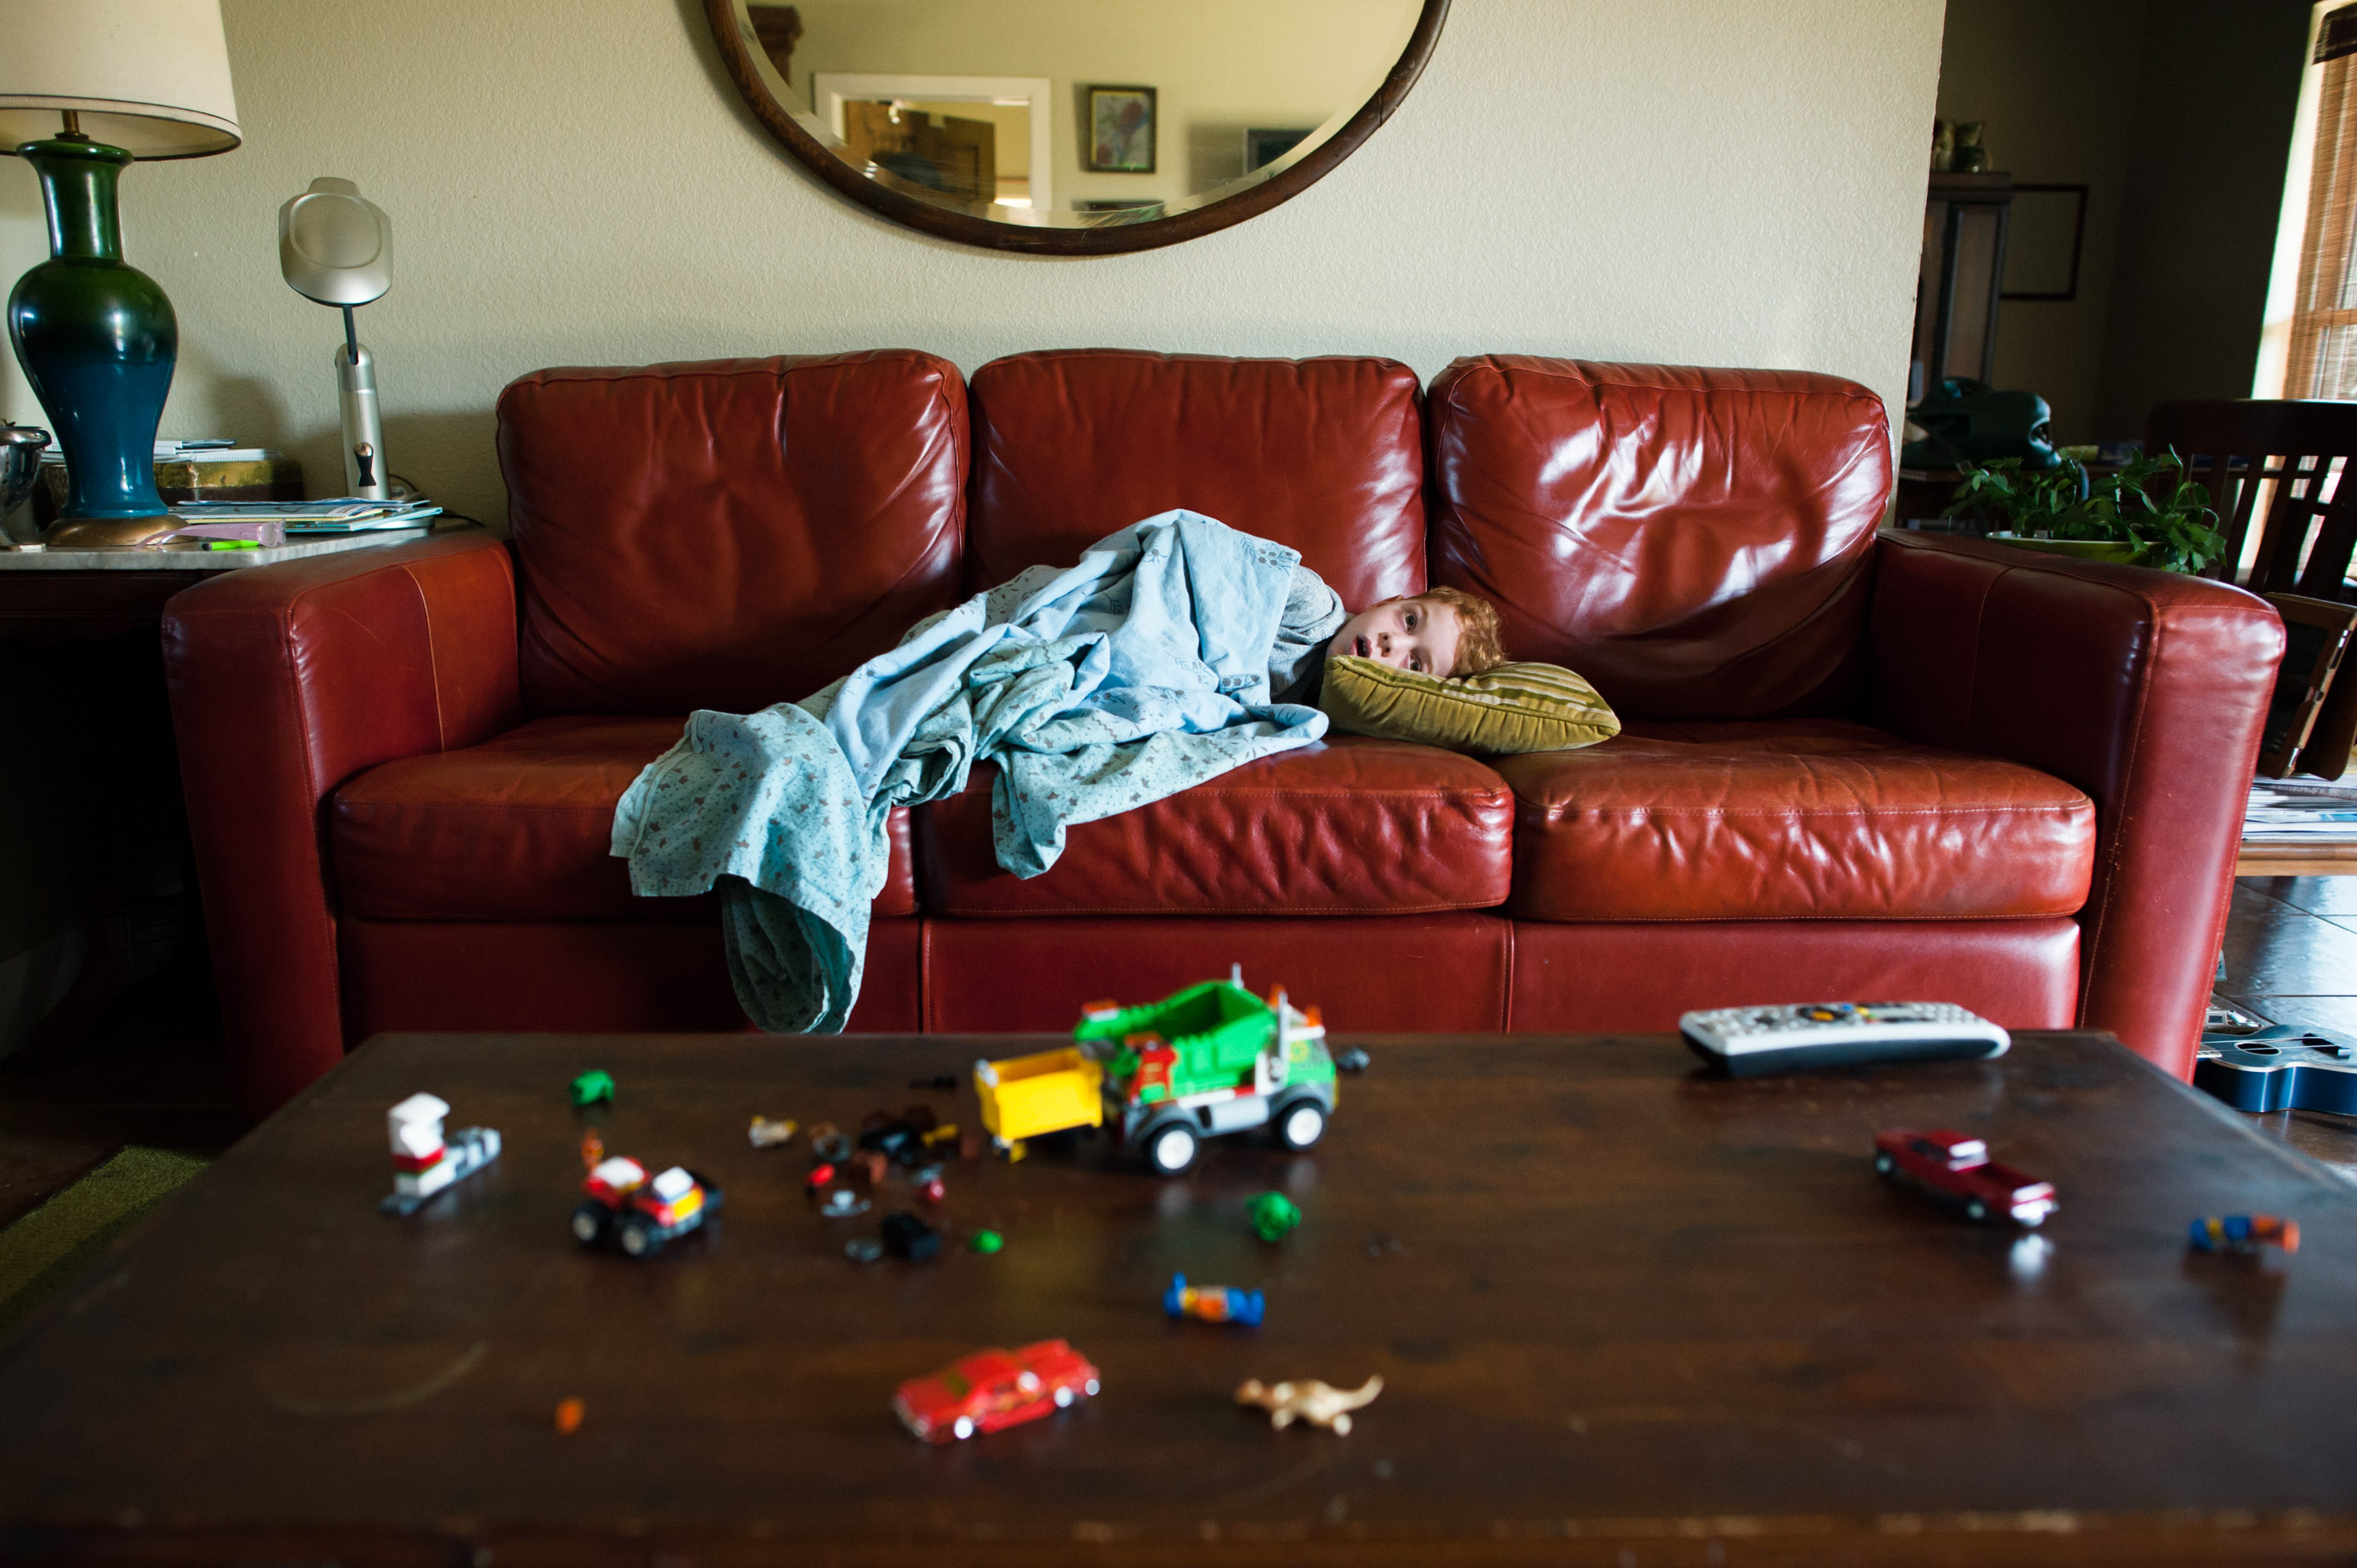 boy on couch - family documentary photography